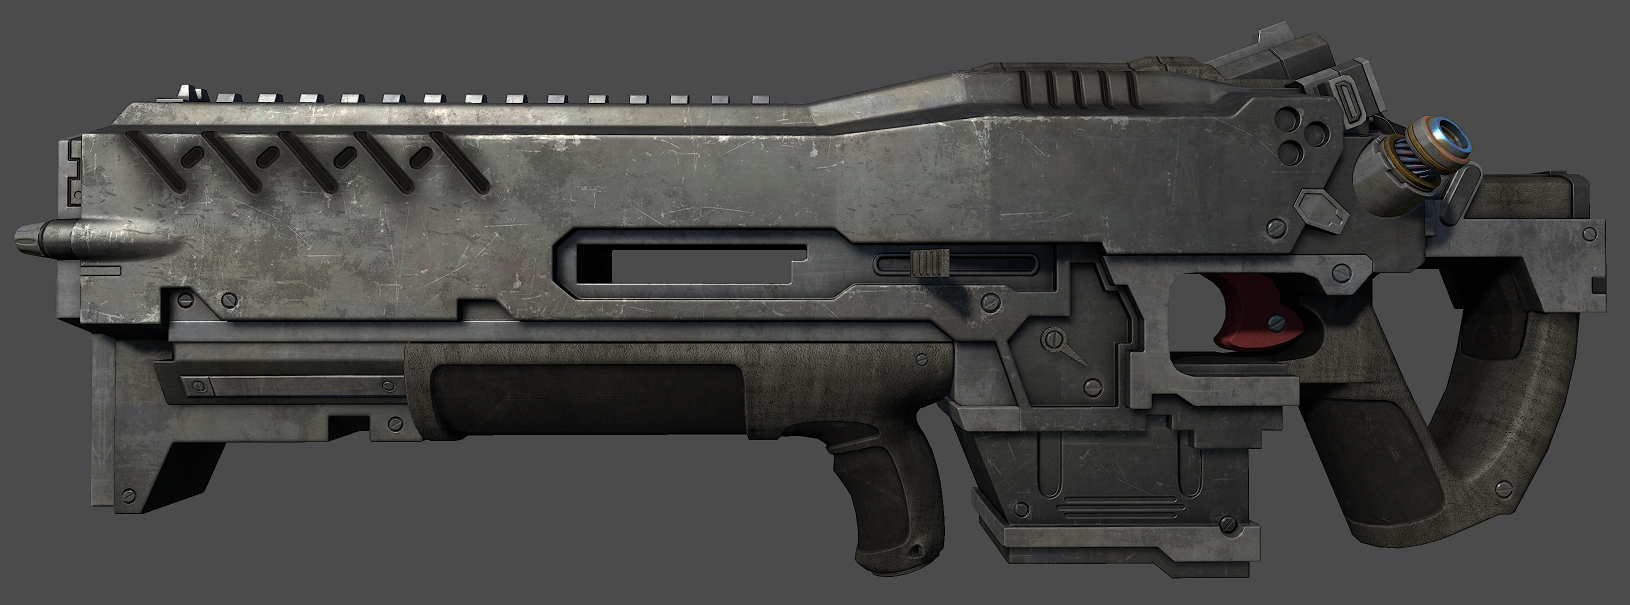 Need A Mesh Made For The Terran C 14 Impaler Gauss Rifle Request Find Fallout 4 Non Adult Mods Loverslab